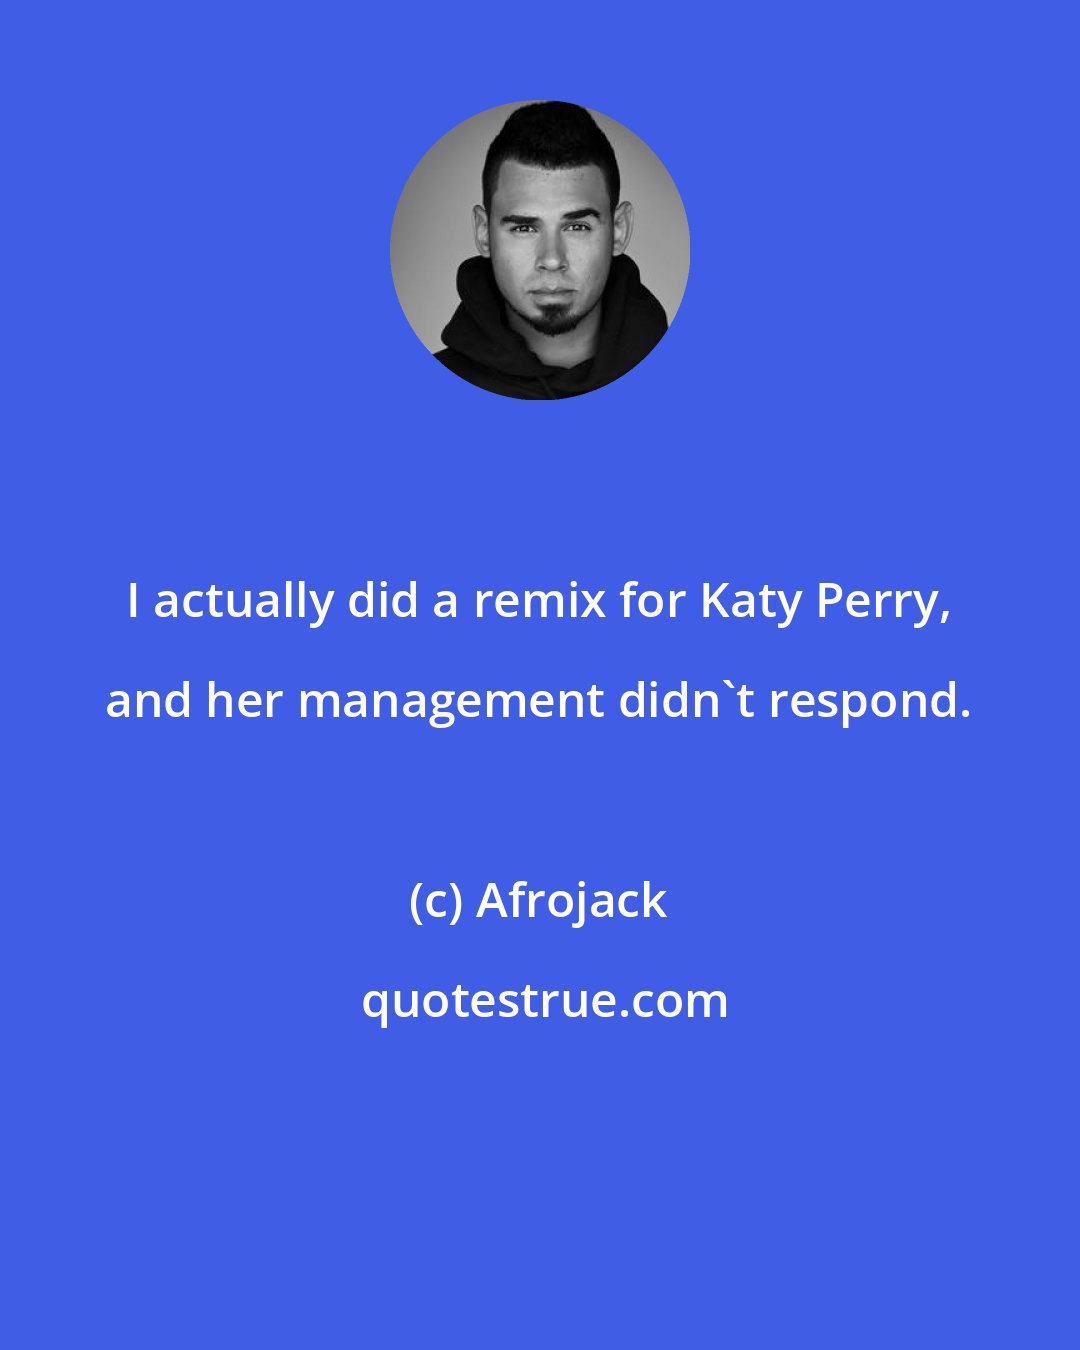 Afrojack: I actually did a remix for Katy Perry, and her management didn't respond.